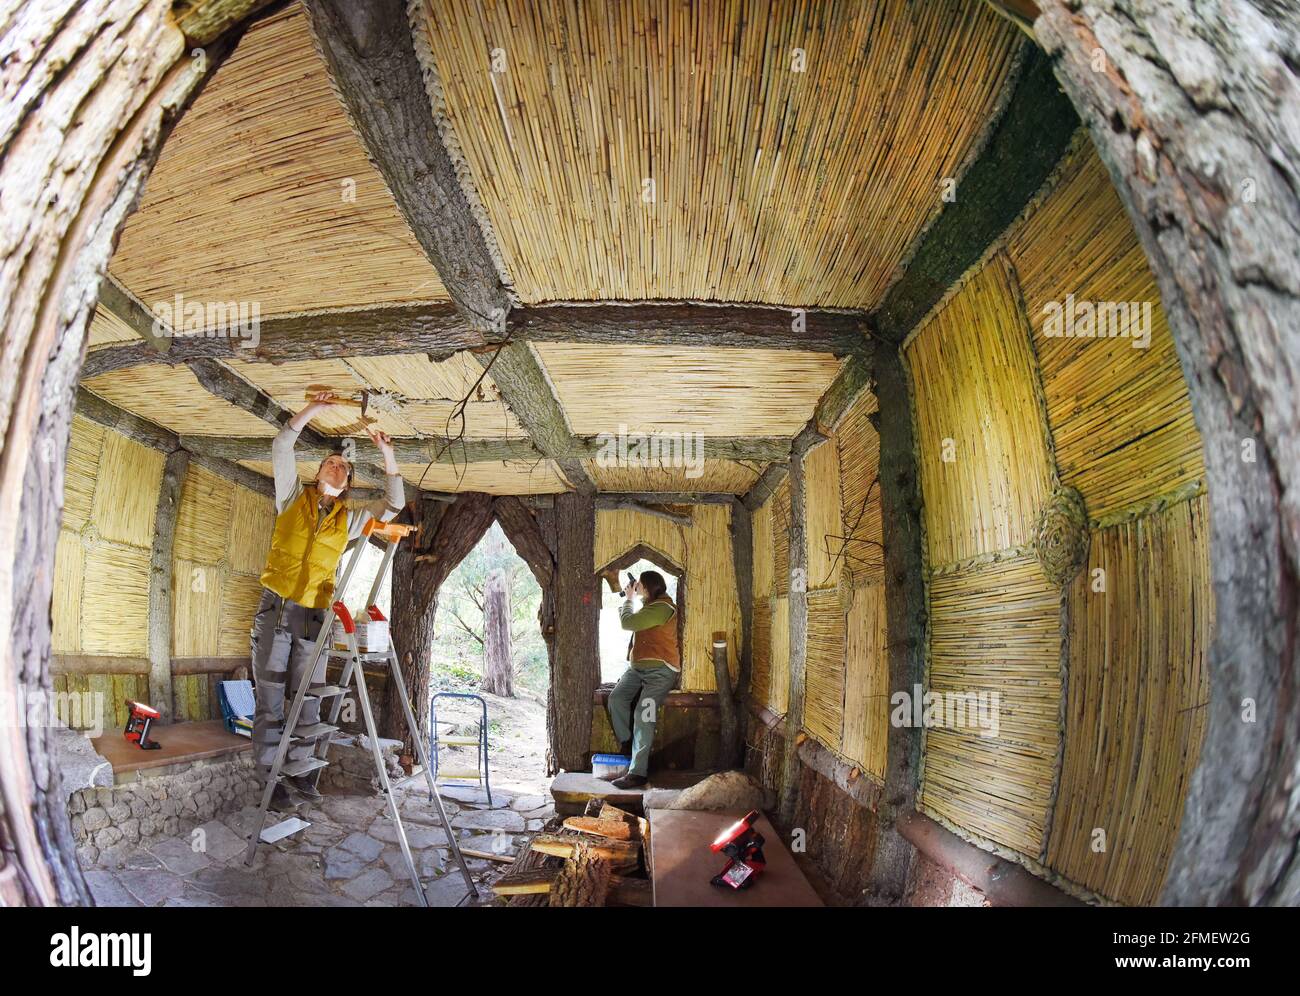 08 May 2021, Saxony-Anhalt, Wörlitz: The graduate restorer Kerstin Klein (l) and the sculptor Katharina Günther apply the last parts of rind boards and reeds to missing parts on the over 230-year-old bark hut in the Wörlitz Park. The small wooden house, also known as the Wurzelhütte, has been extensively restored in the last two years. The Borkenhäuschen served Prince Franz as a private bathhouse for changing clothes before swimming in Lake Wörlitz and is clad on the outside with gnarled oak trunks, slabs and bark. Inside, coffers of elm half-trunks and with hand-woven reed mats and rush braid Stock Photo